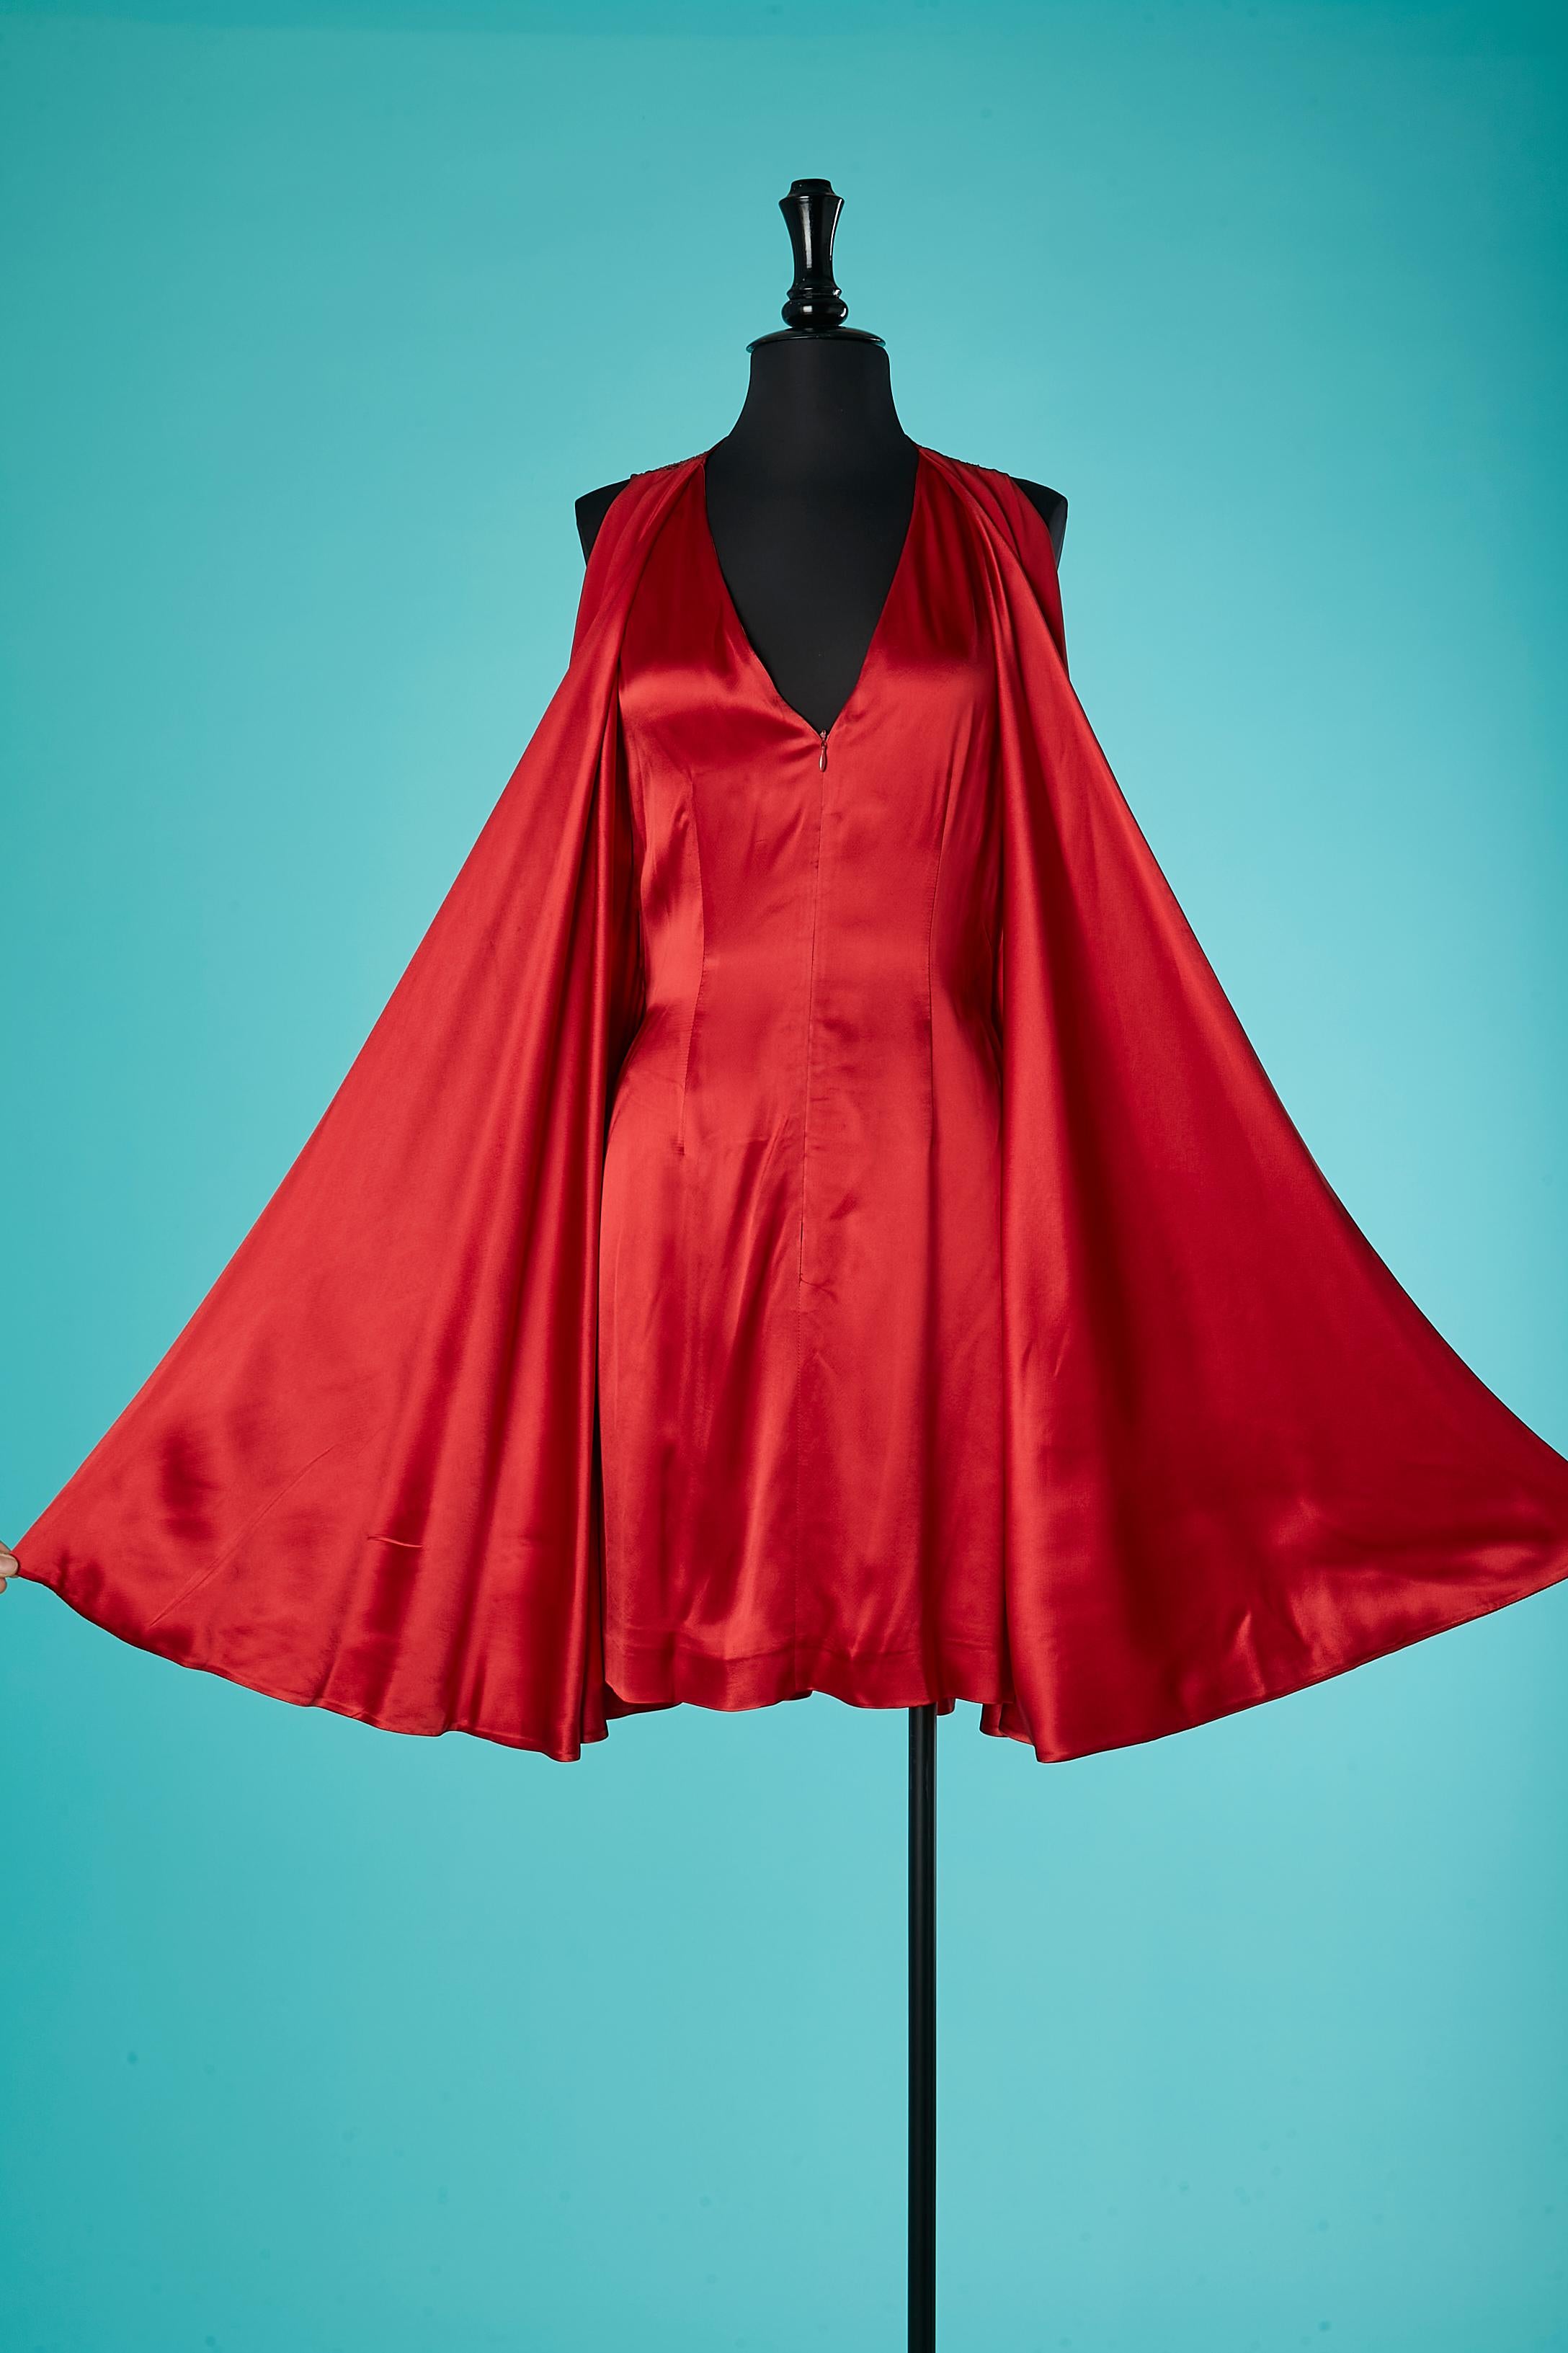 Red satin sleeveless cocktail dress with see-through lace back and cape effect . 
No fabric tag composition but probably silk satin . One side is shiny ( the dress) and the other side is mat ( the cape is mat) 
Invisible zip in the middle front.